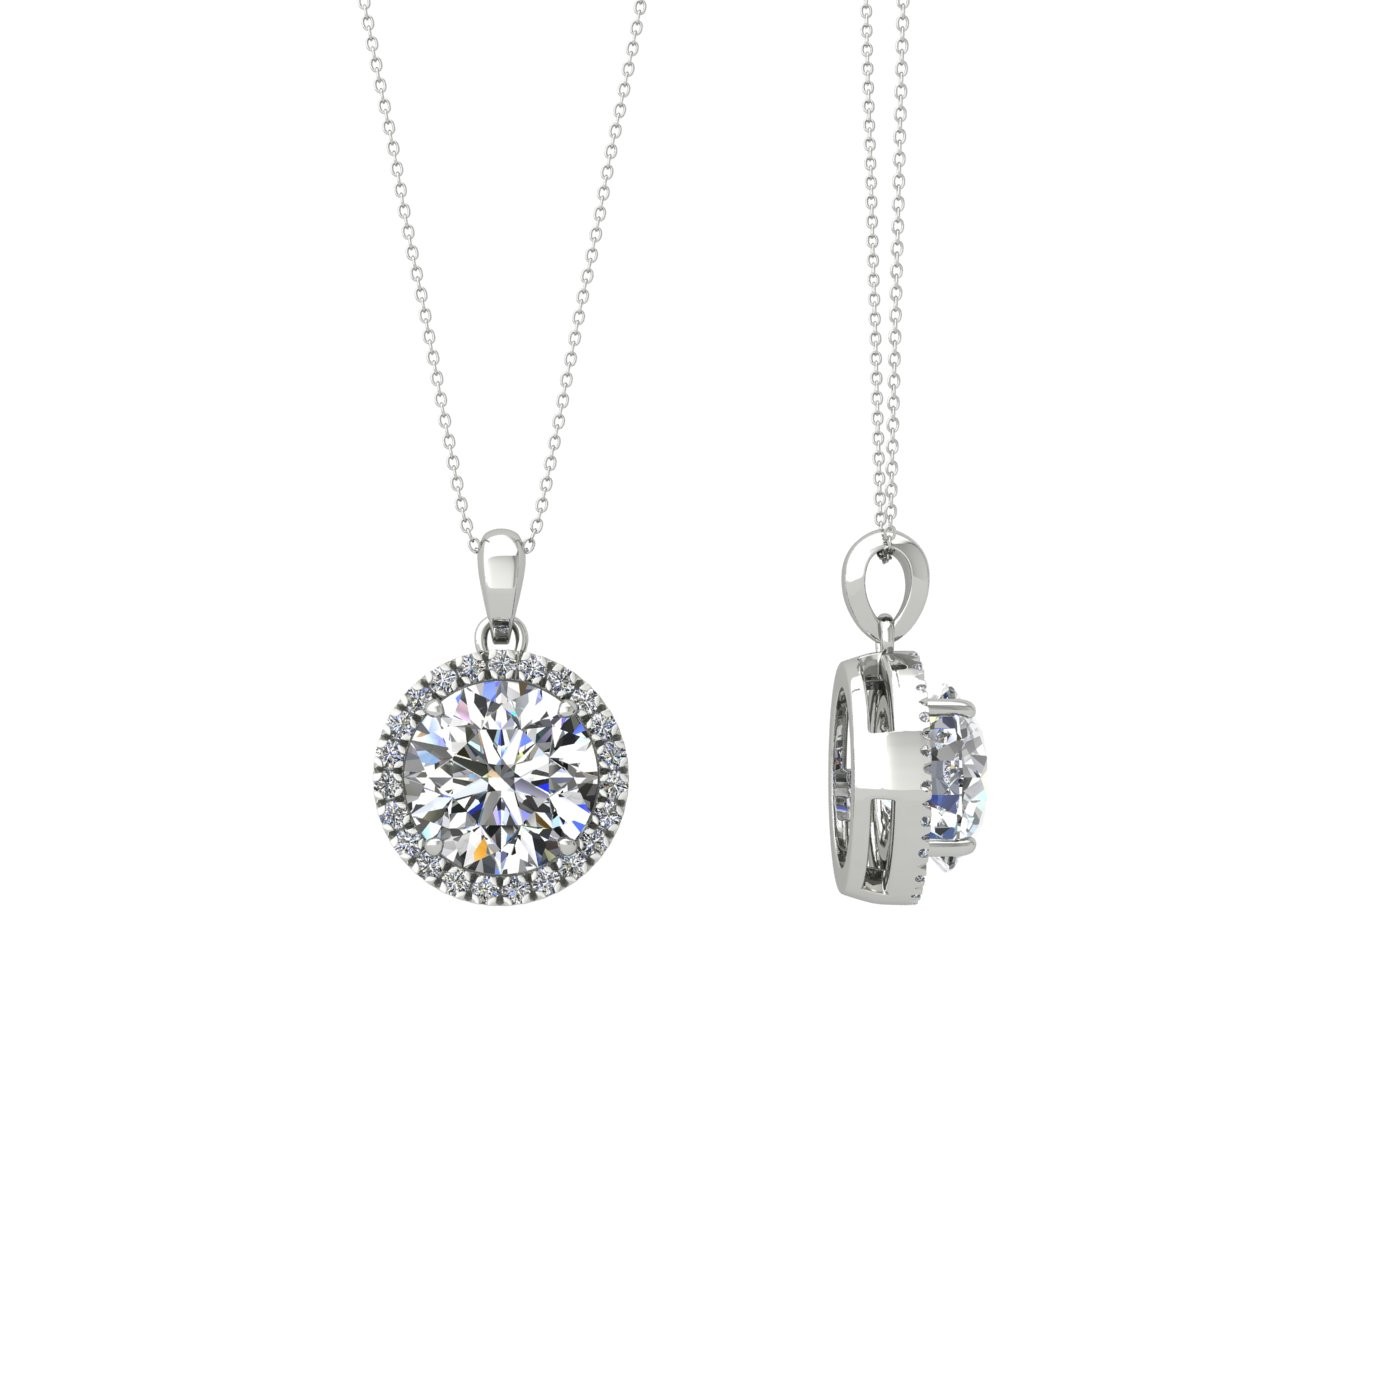 18K WHITE GOLD  0,3 CT 4 PRONG ROUND SHAPE DIAMOND PENDANT WITH DIAMOND PAVÉ SET HALO INCLUDING CHAIN SEPERATE FROM THE PENDANT